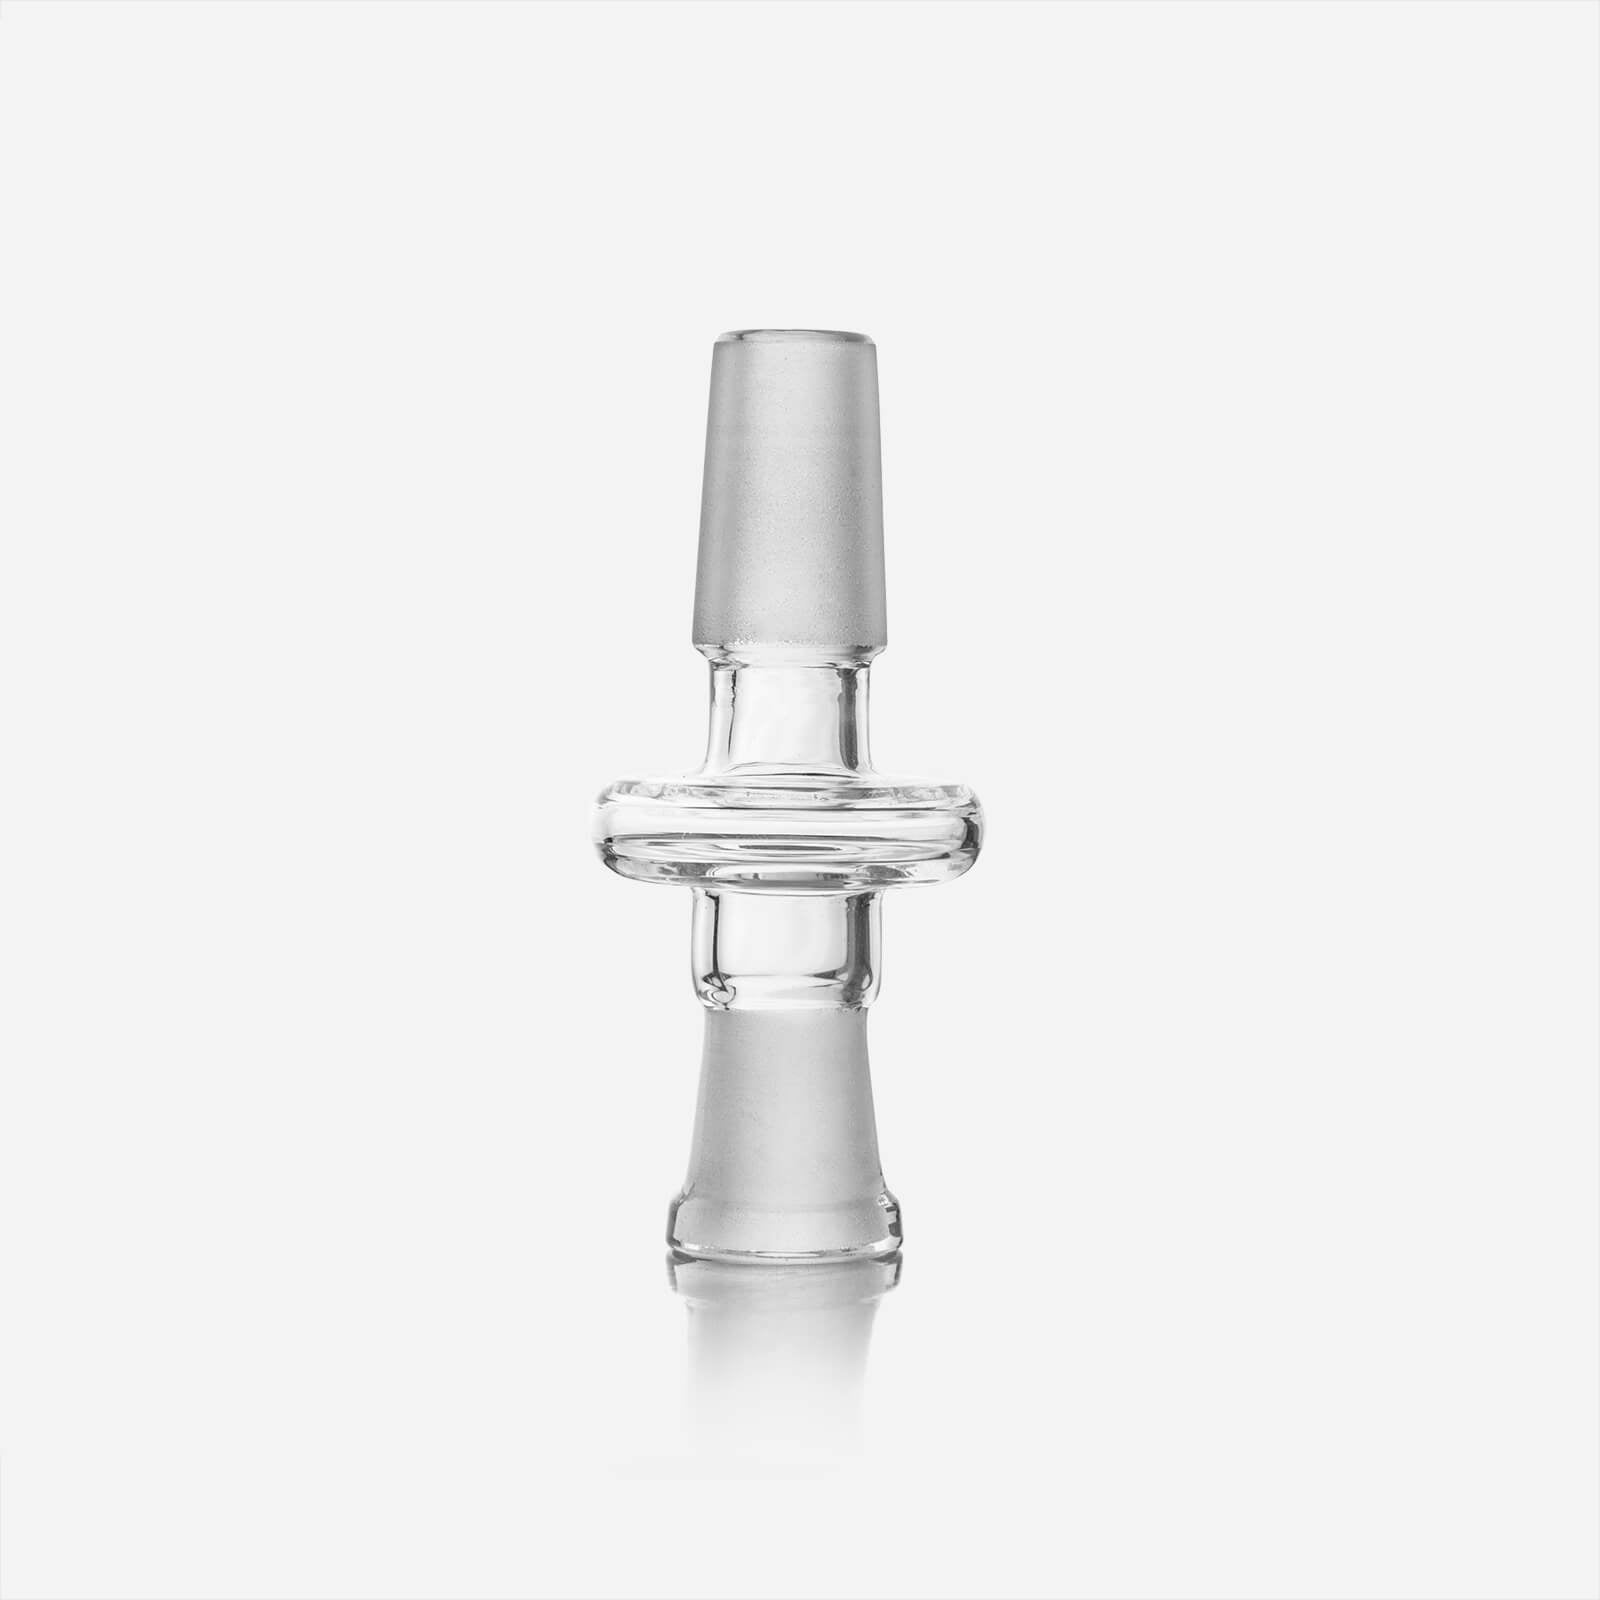 14mm Male to 10mm Female Adapter - INHALCO